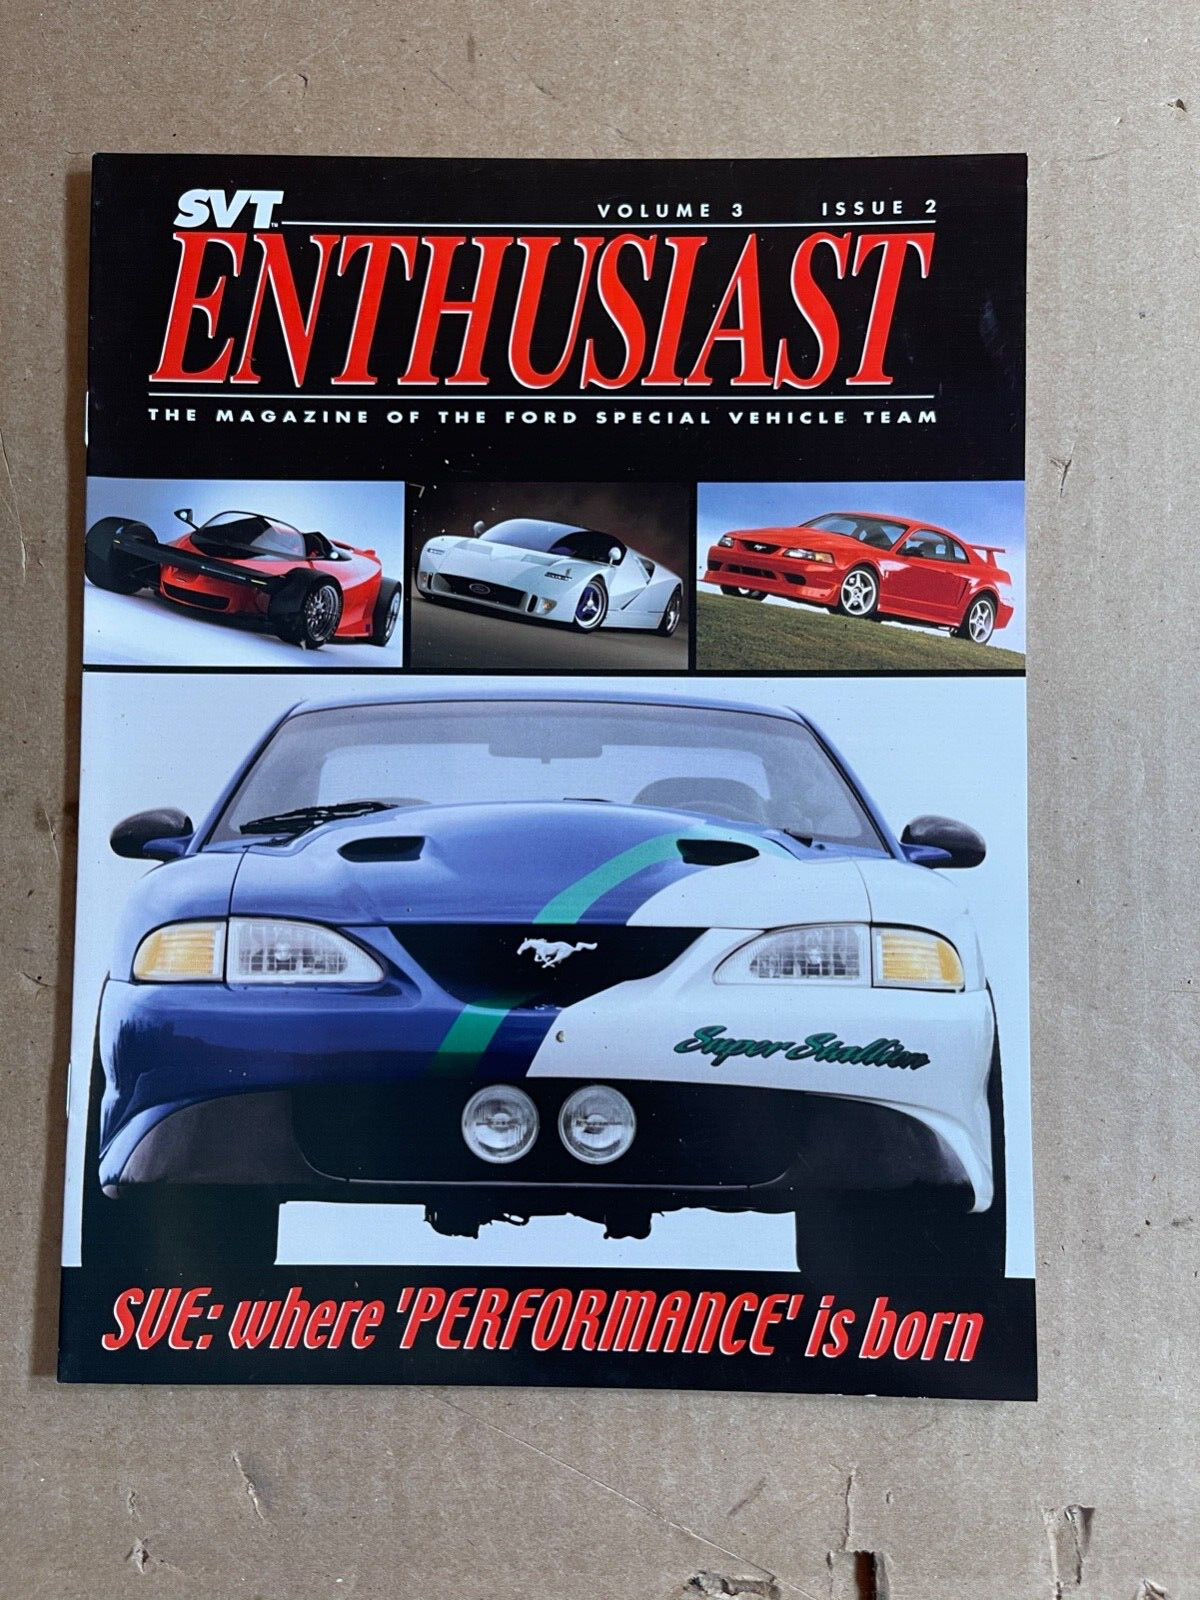 2000 Ford SVT Special Vehicle Team Enthusiast Magazine Vol 3 ISSUE #2 SVT